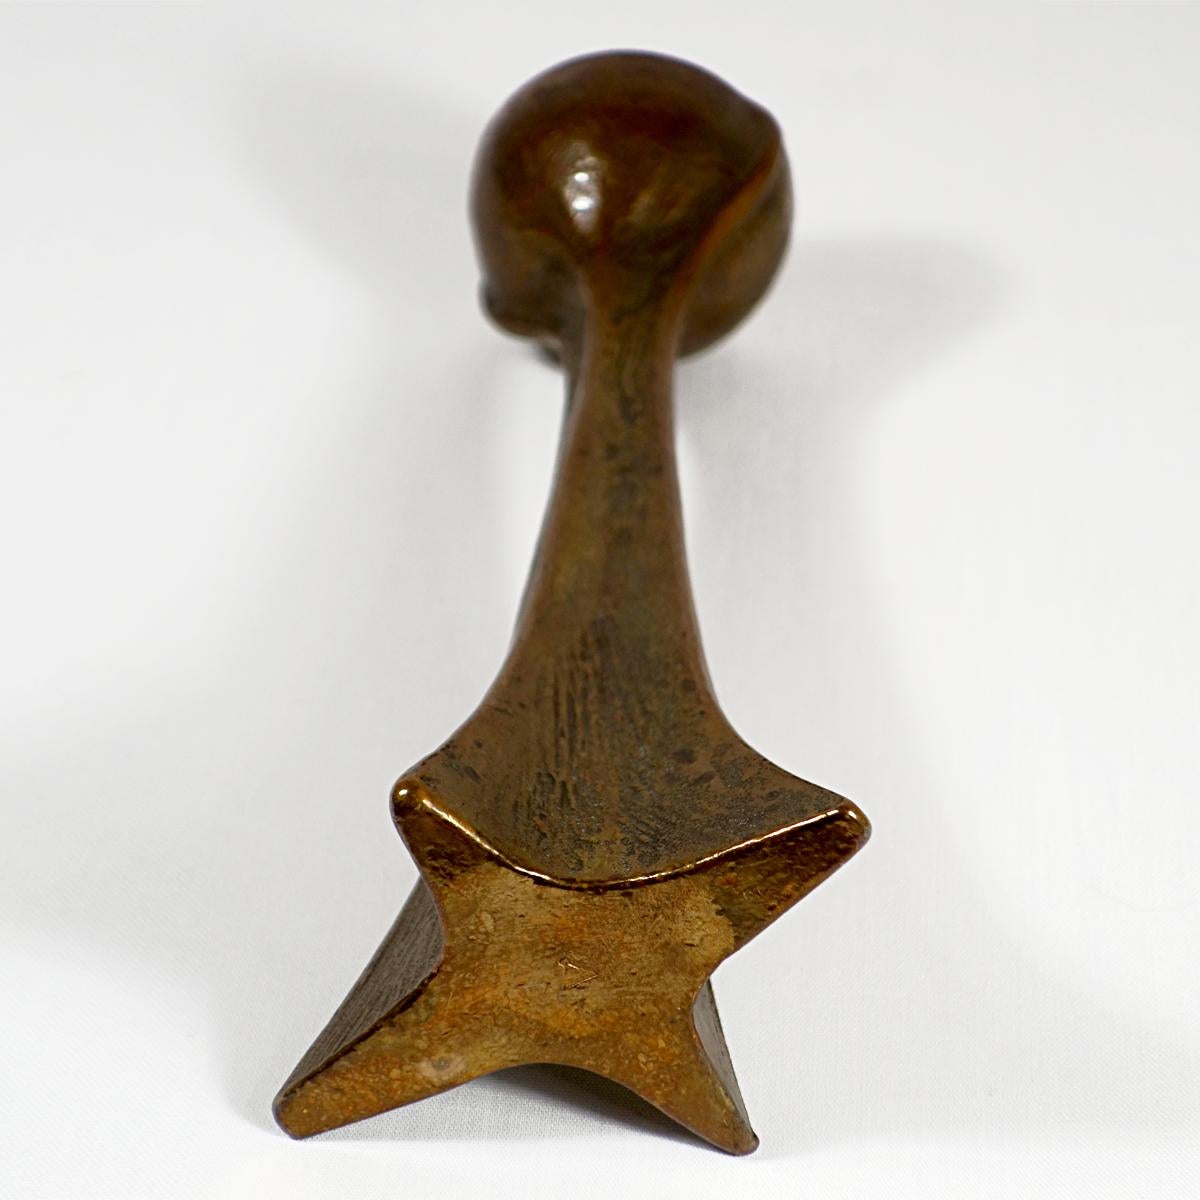 Very tactile and heavy candle stick probably of Scandinavian origin. It is made of cast copper and has a star shaped foot that fluently turns into a round organically shaped top. Both the foot as the top have a beautiful patine.
The candleholder is